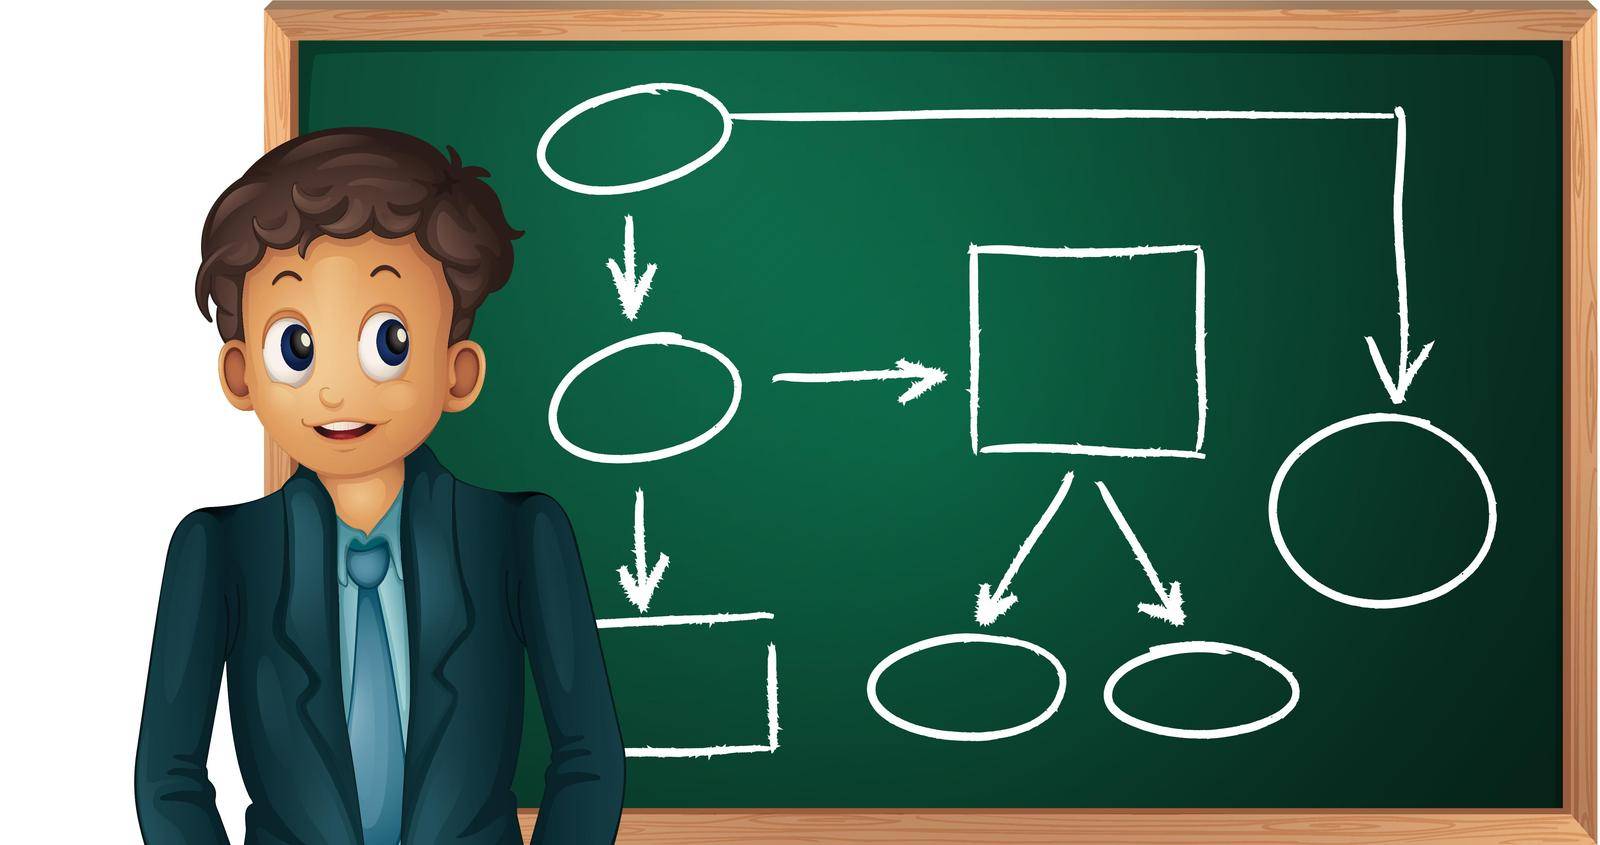 Illustration of a man showing networking